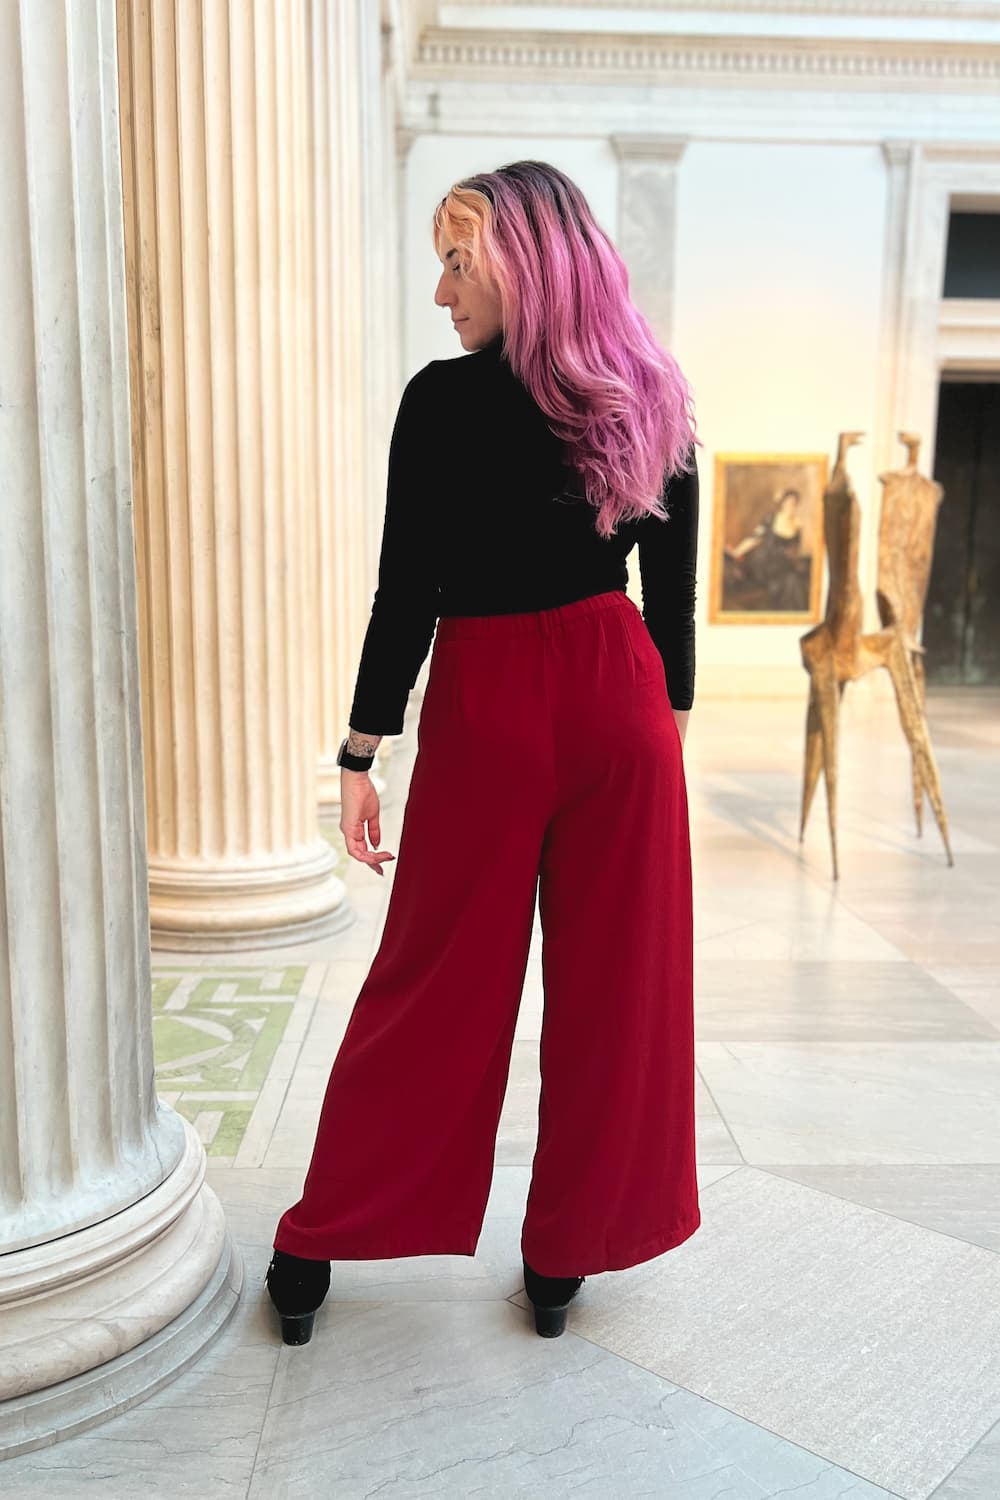 35 Ways to Wear Wide-Leg Pants This Winter | Pink wide leg trousers,  Styling wide leg pants, Red wide leg pants